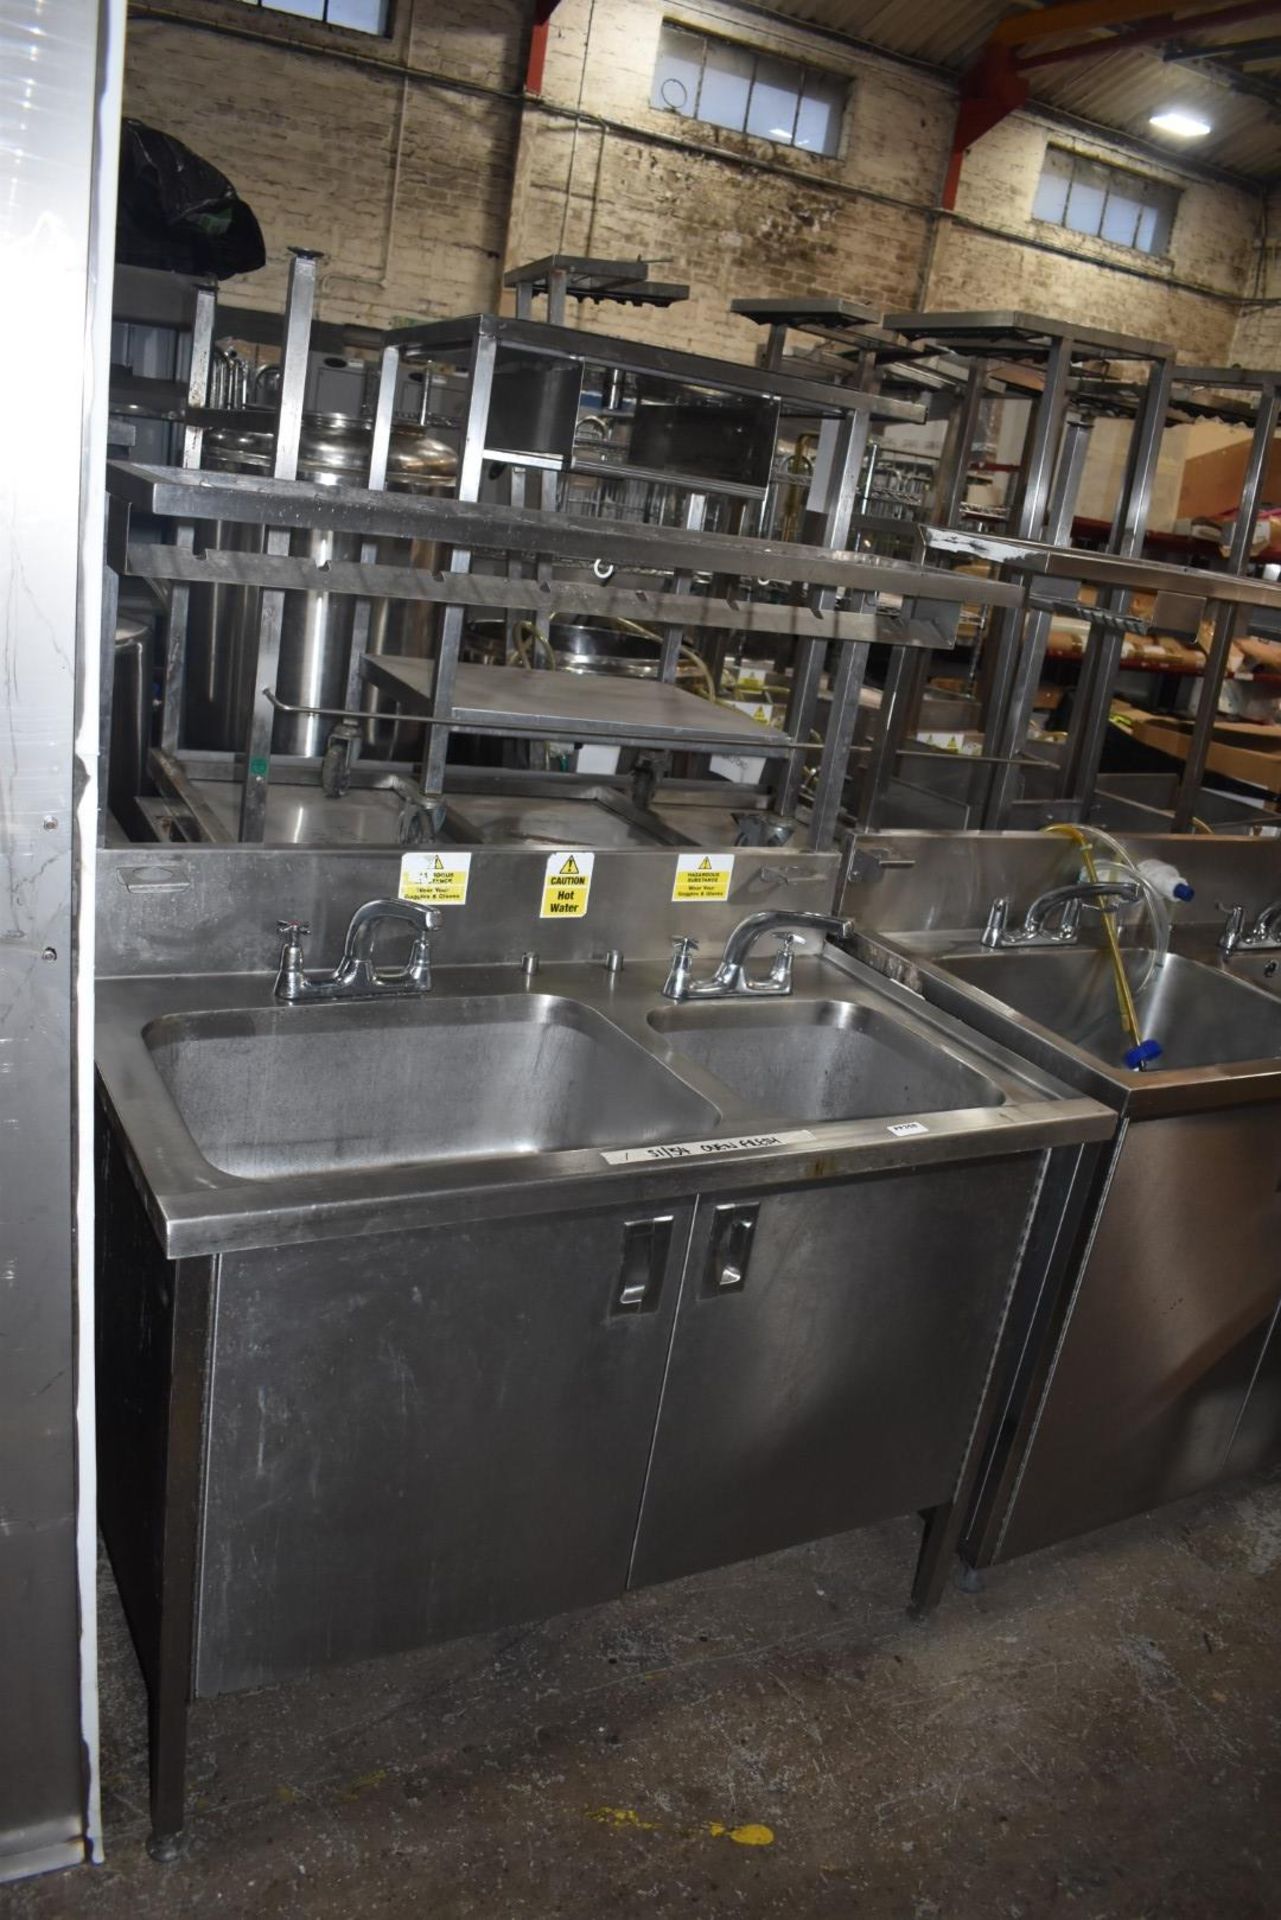 1 x Commercial Kitchen Wash Station With Two Large Sink Bowls, Mixer Taps, Overhead Drying Rack - Image 3 of 9